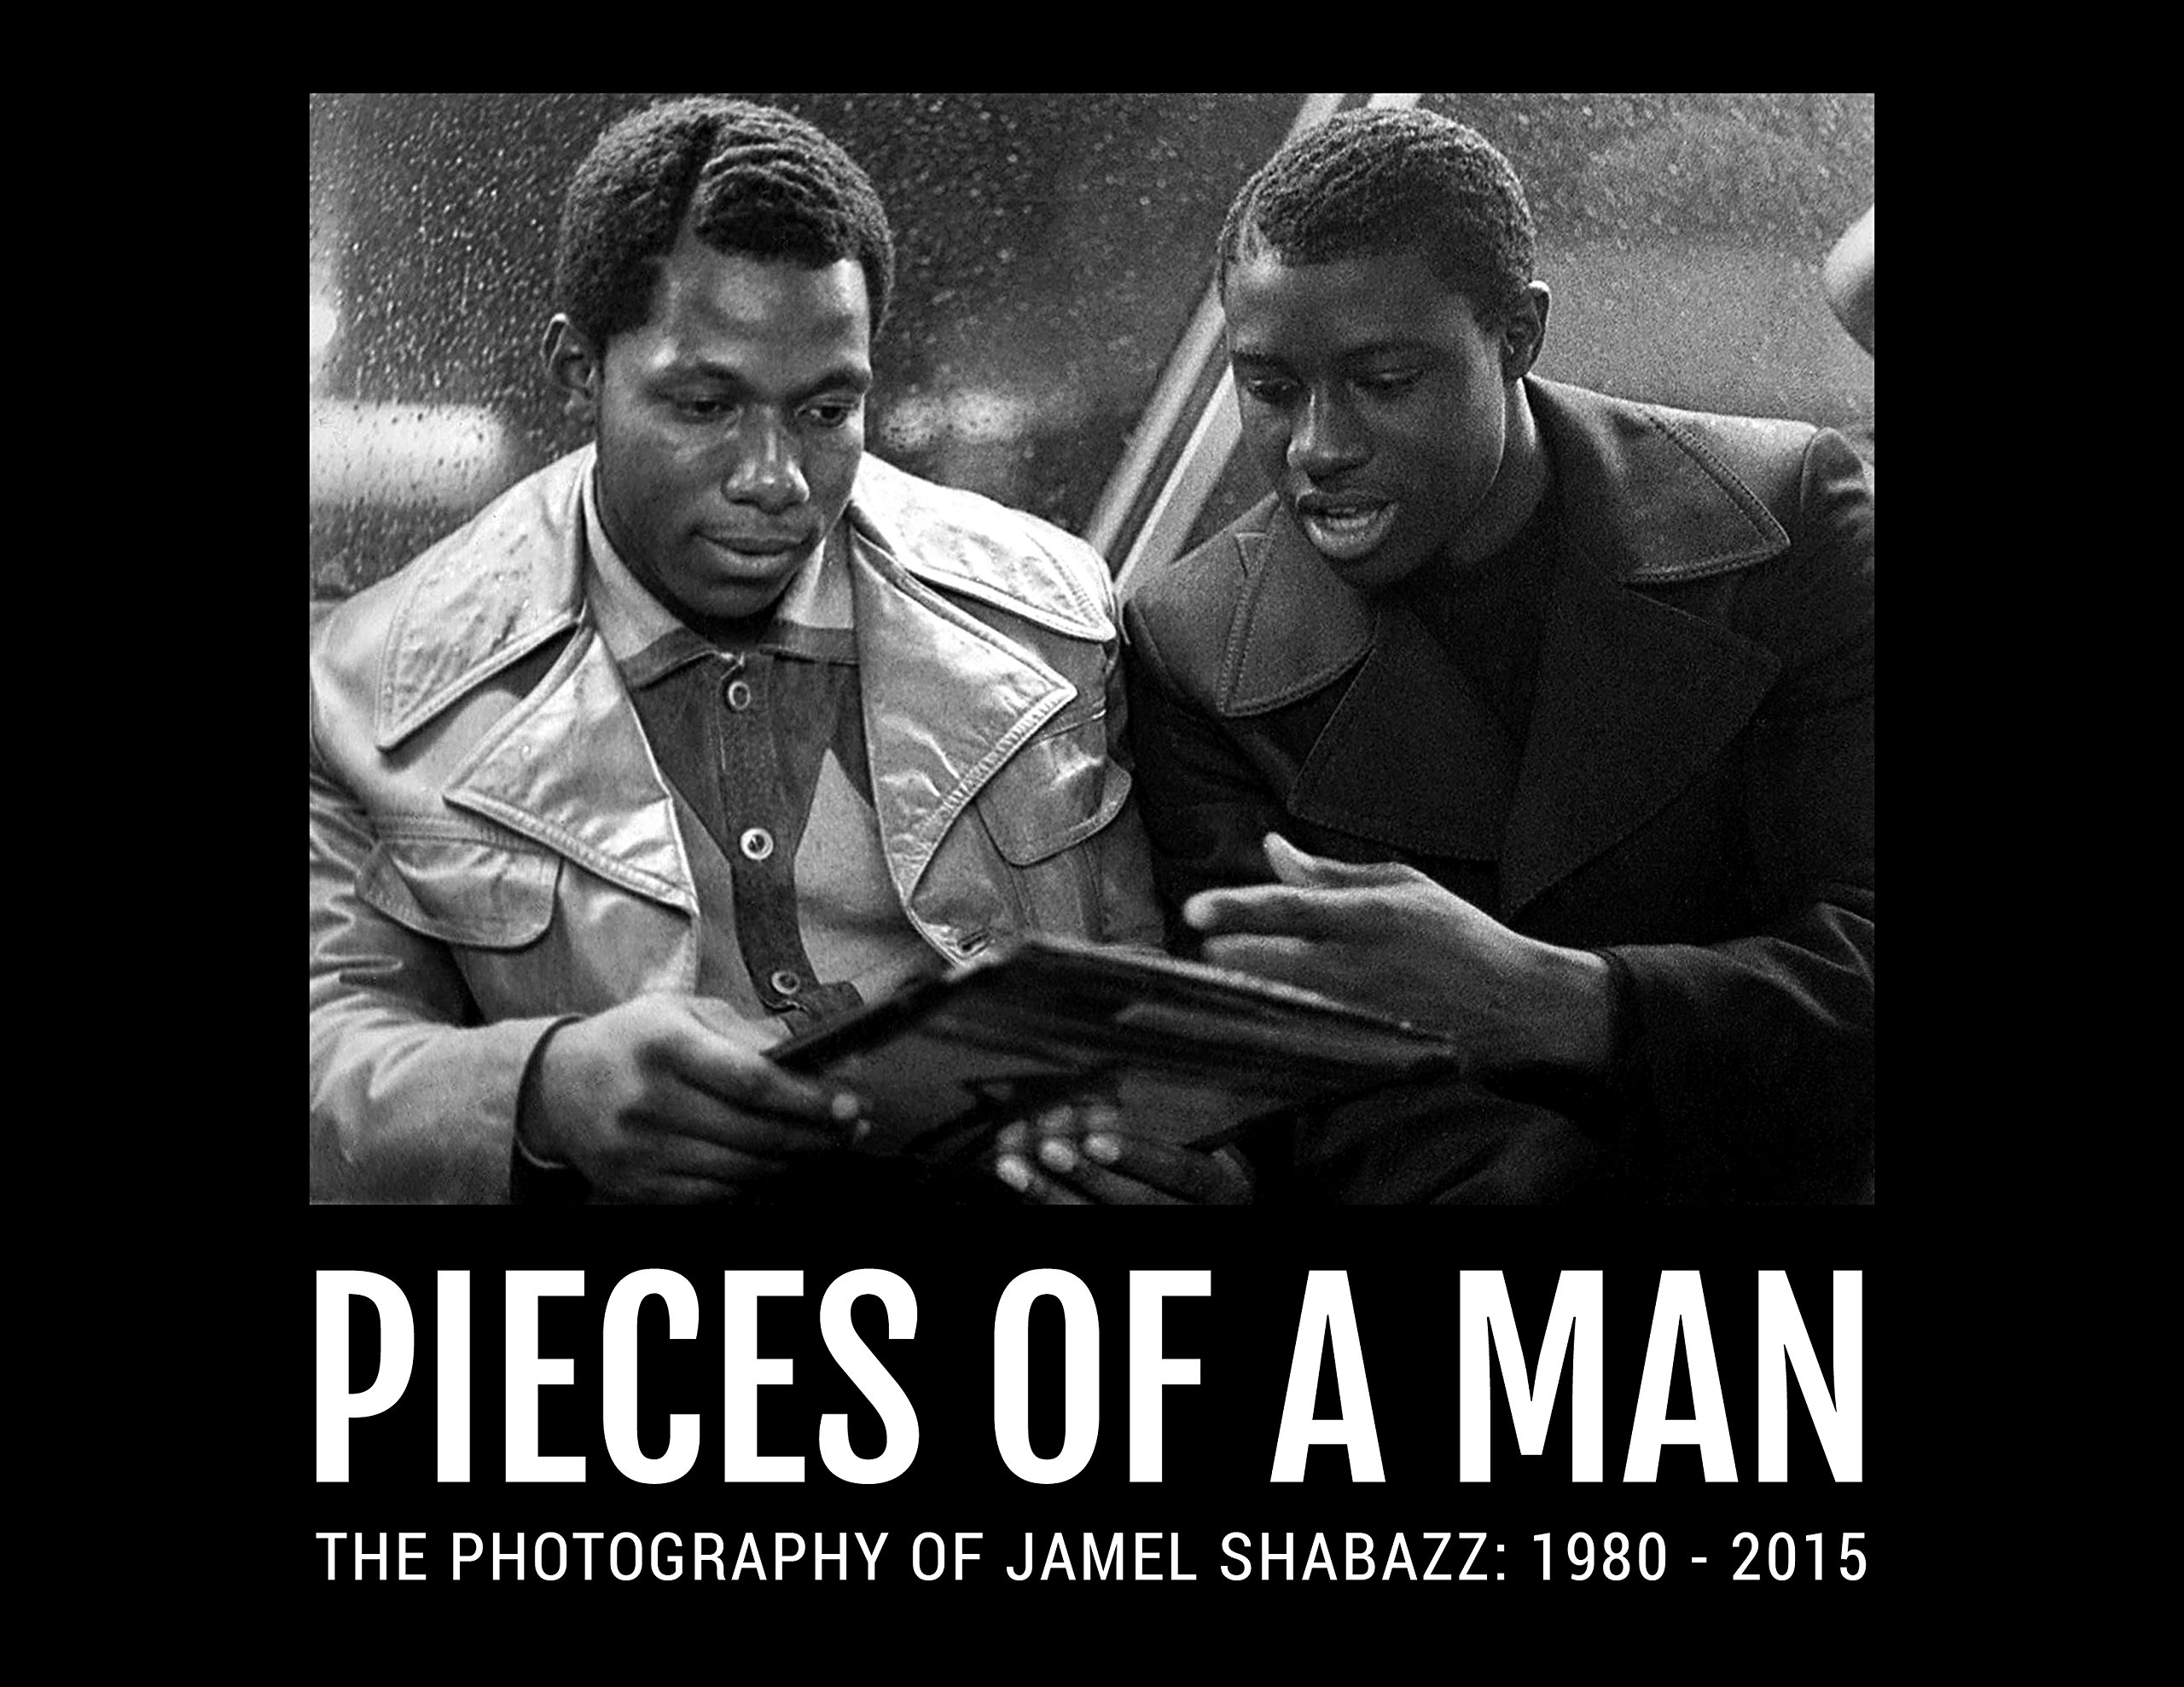 PIECES OF A MAN